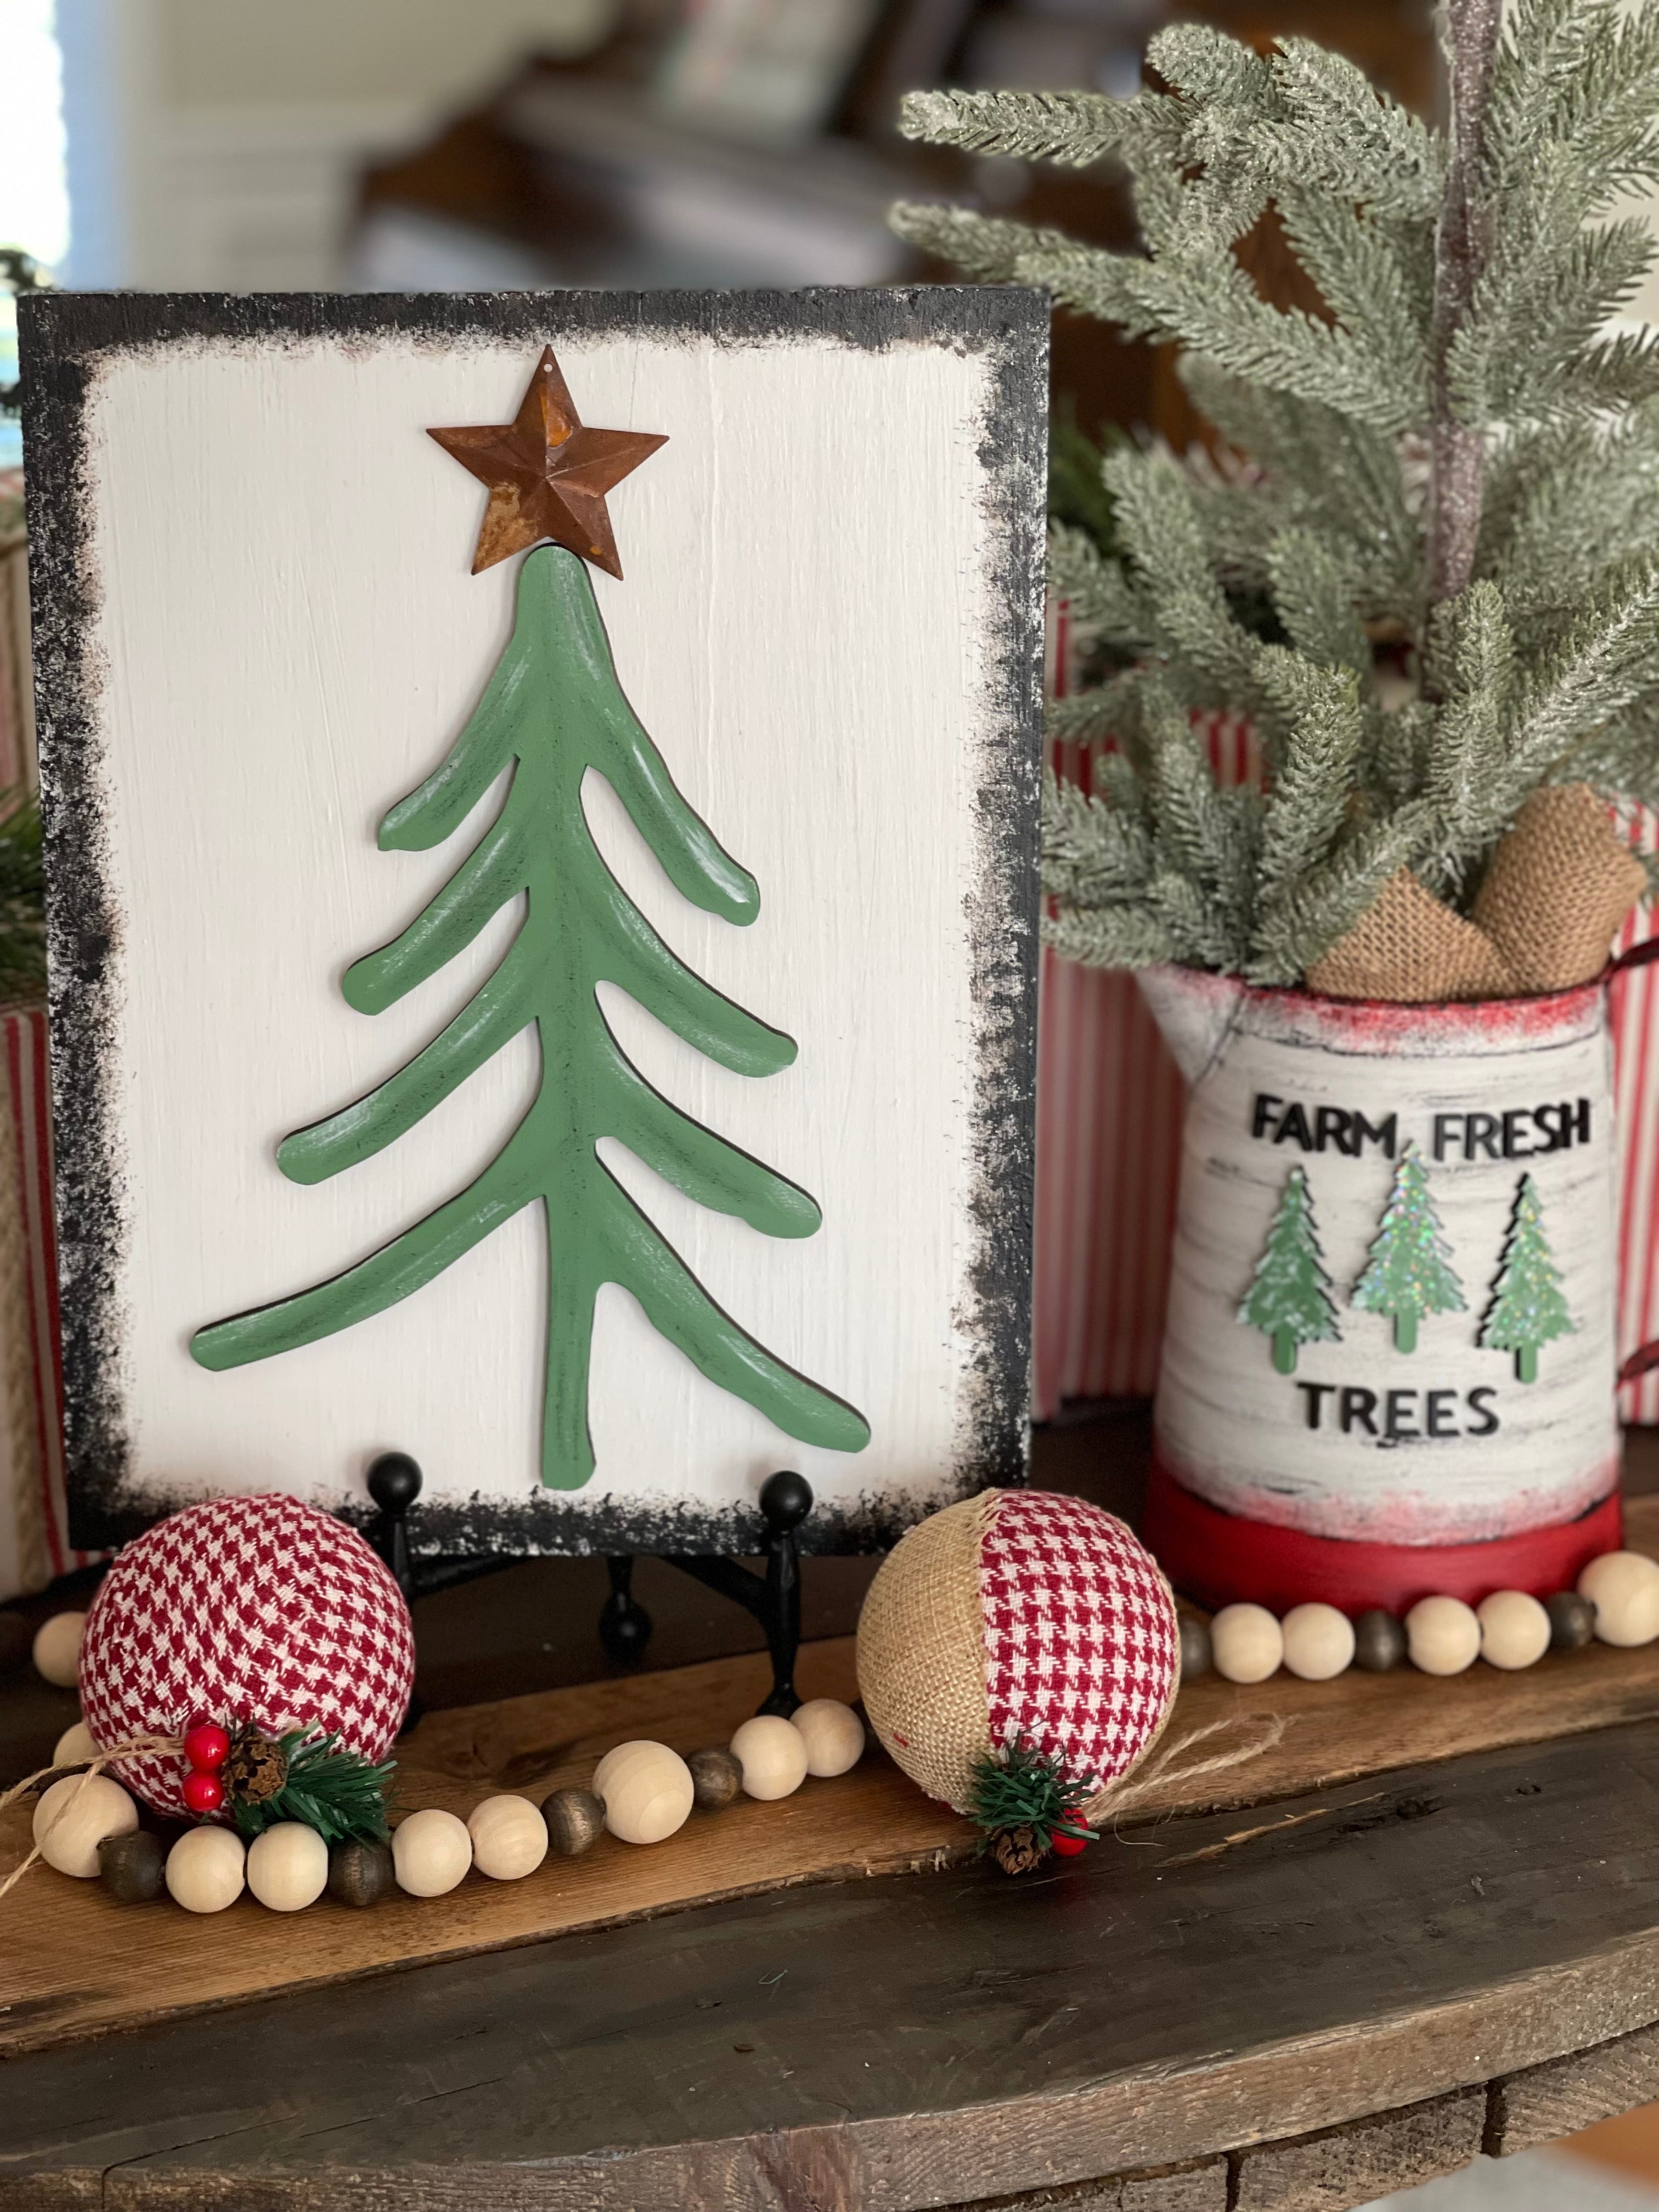 This image shows the pine tree paired with our 3D wood cutout Christmas tree with a metal star.  Each are sold separately.  